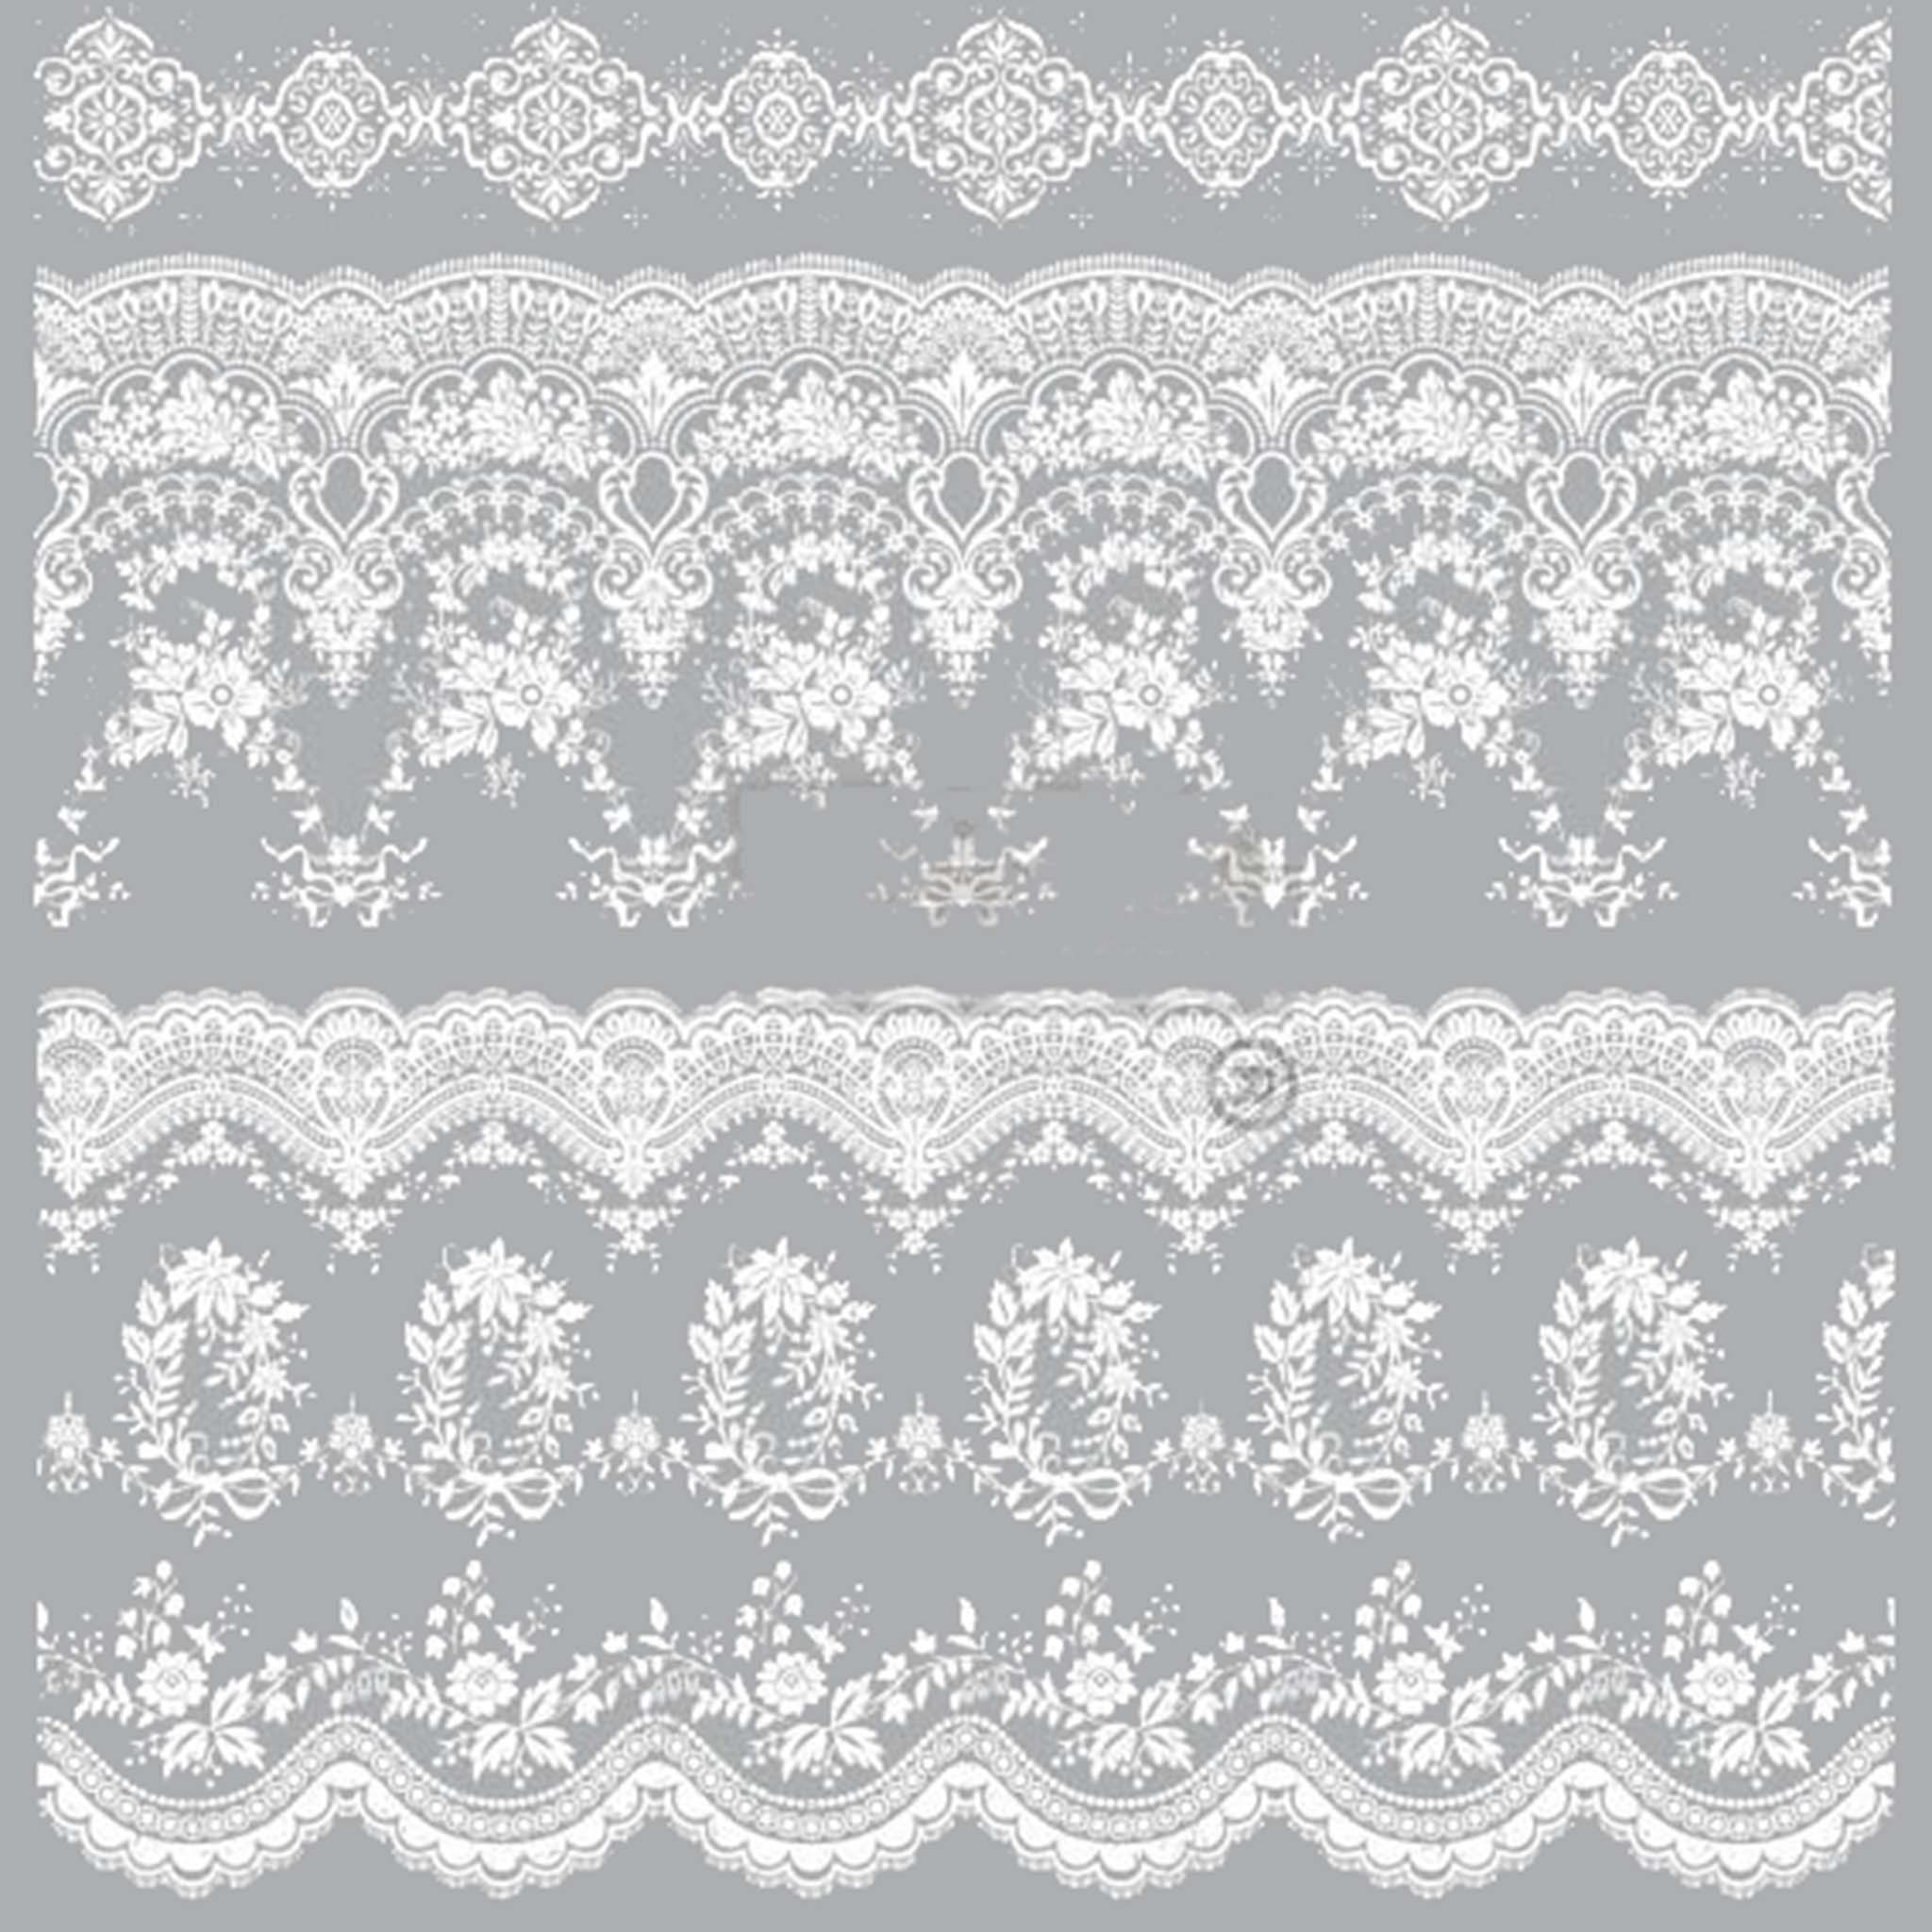 Small rub-on transfer of a white vintage lace wallpaper design on a grey background.